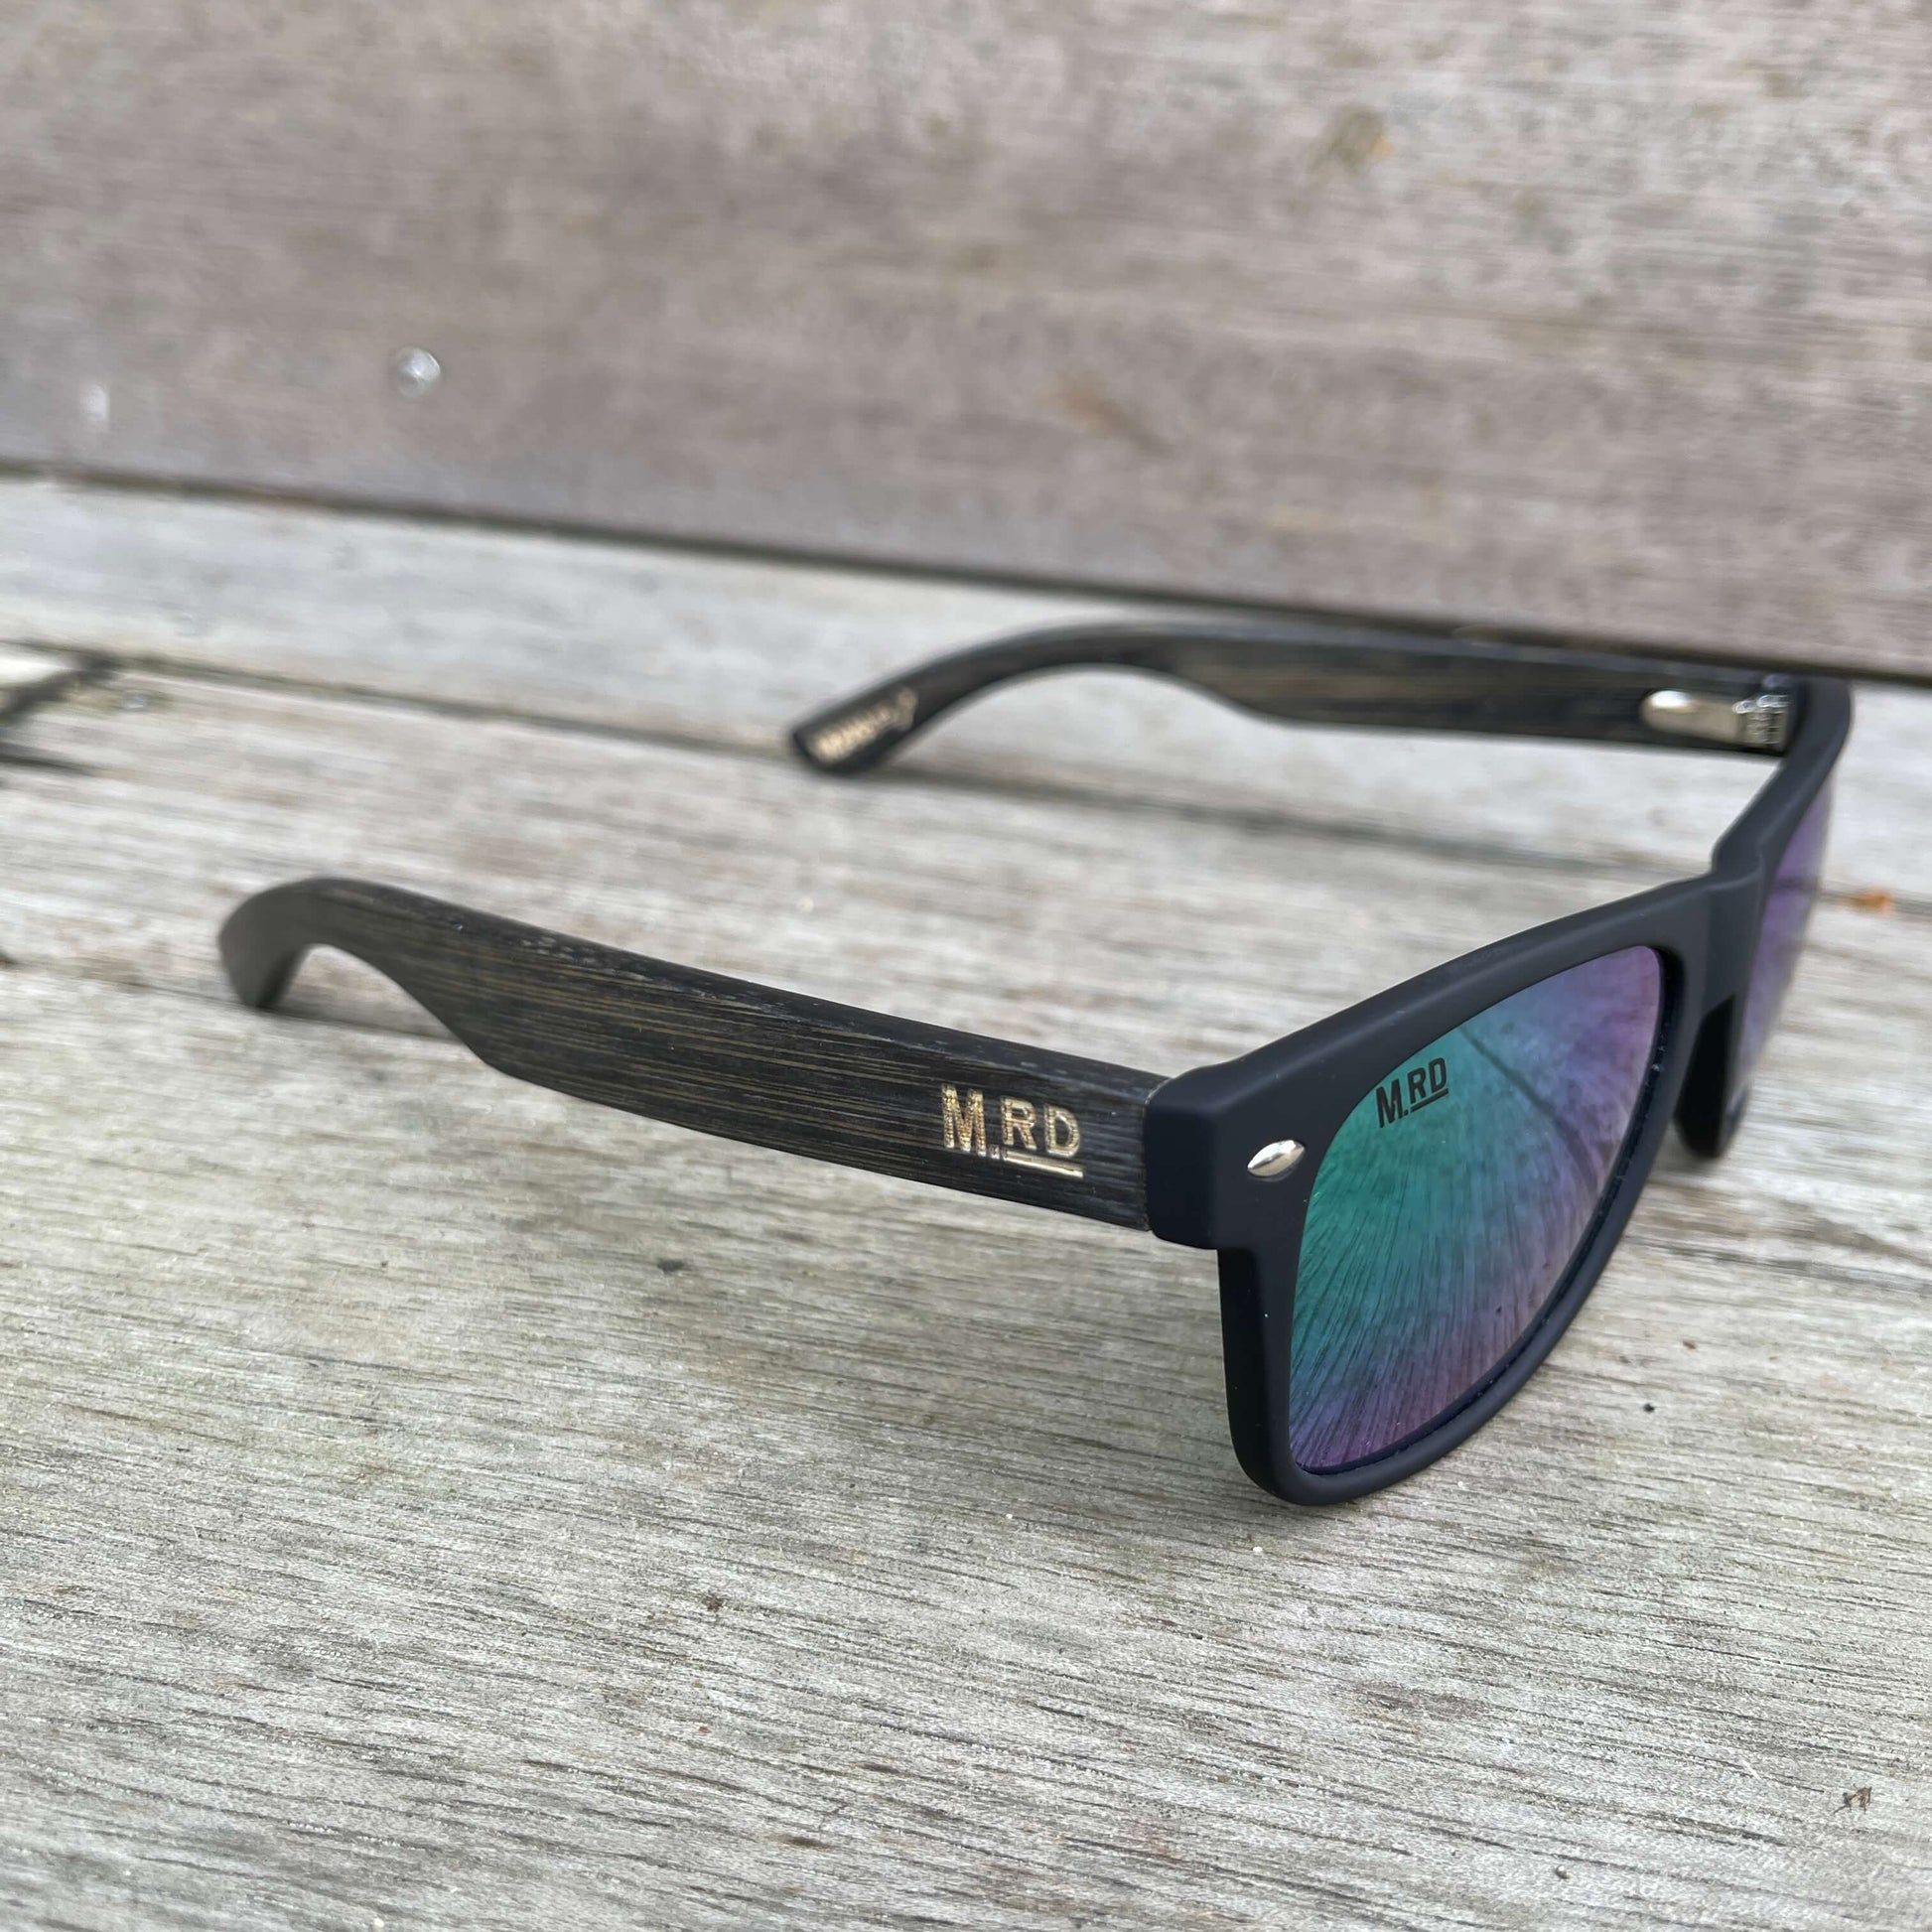 Sunglasses with dark wooden arms, black frames and green reflective lenses.